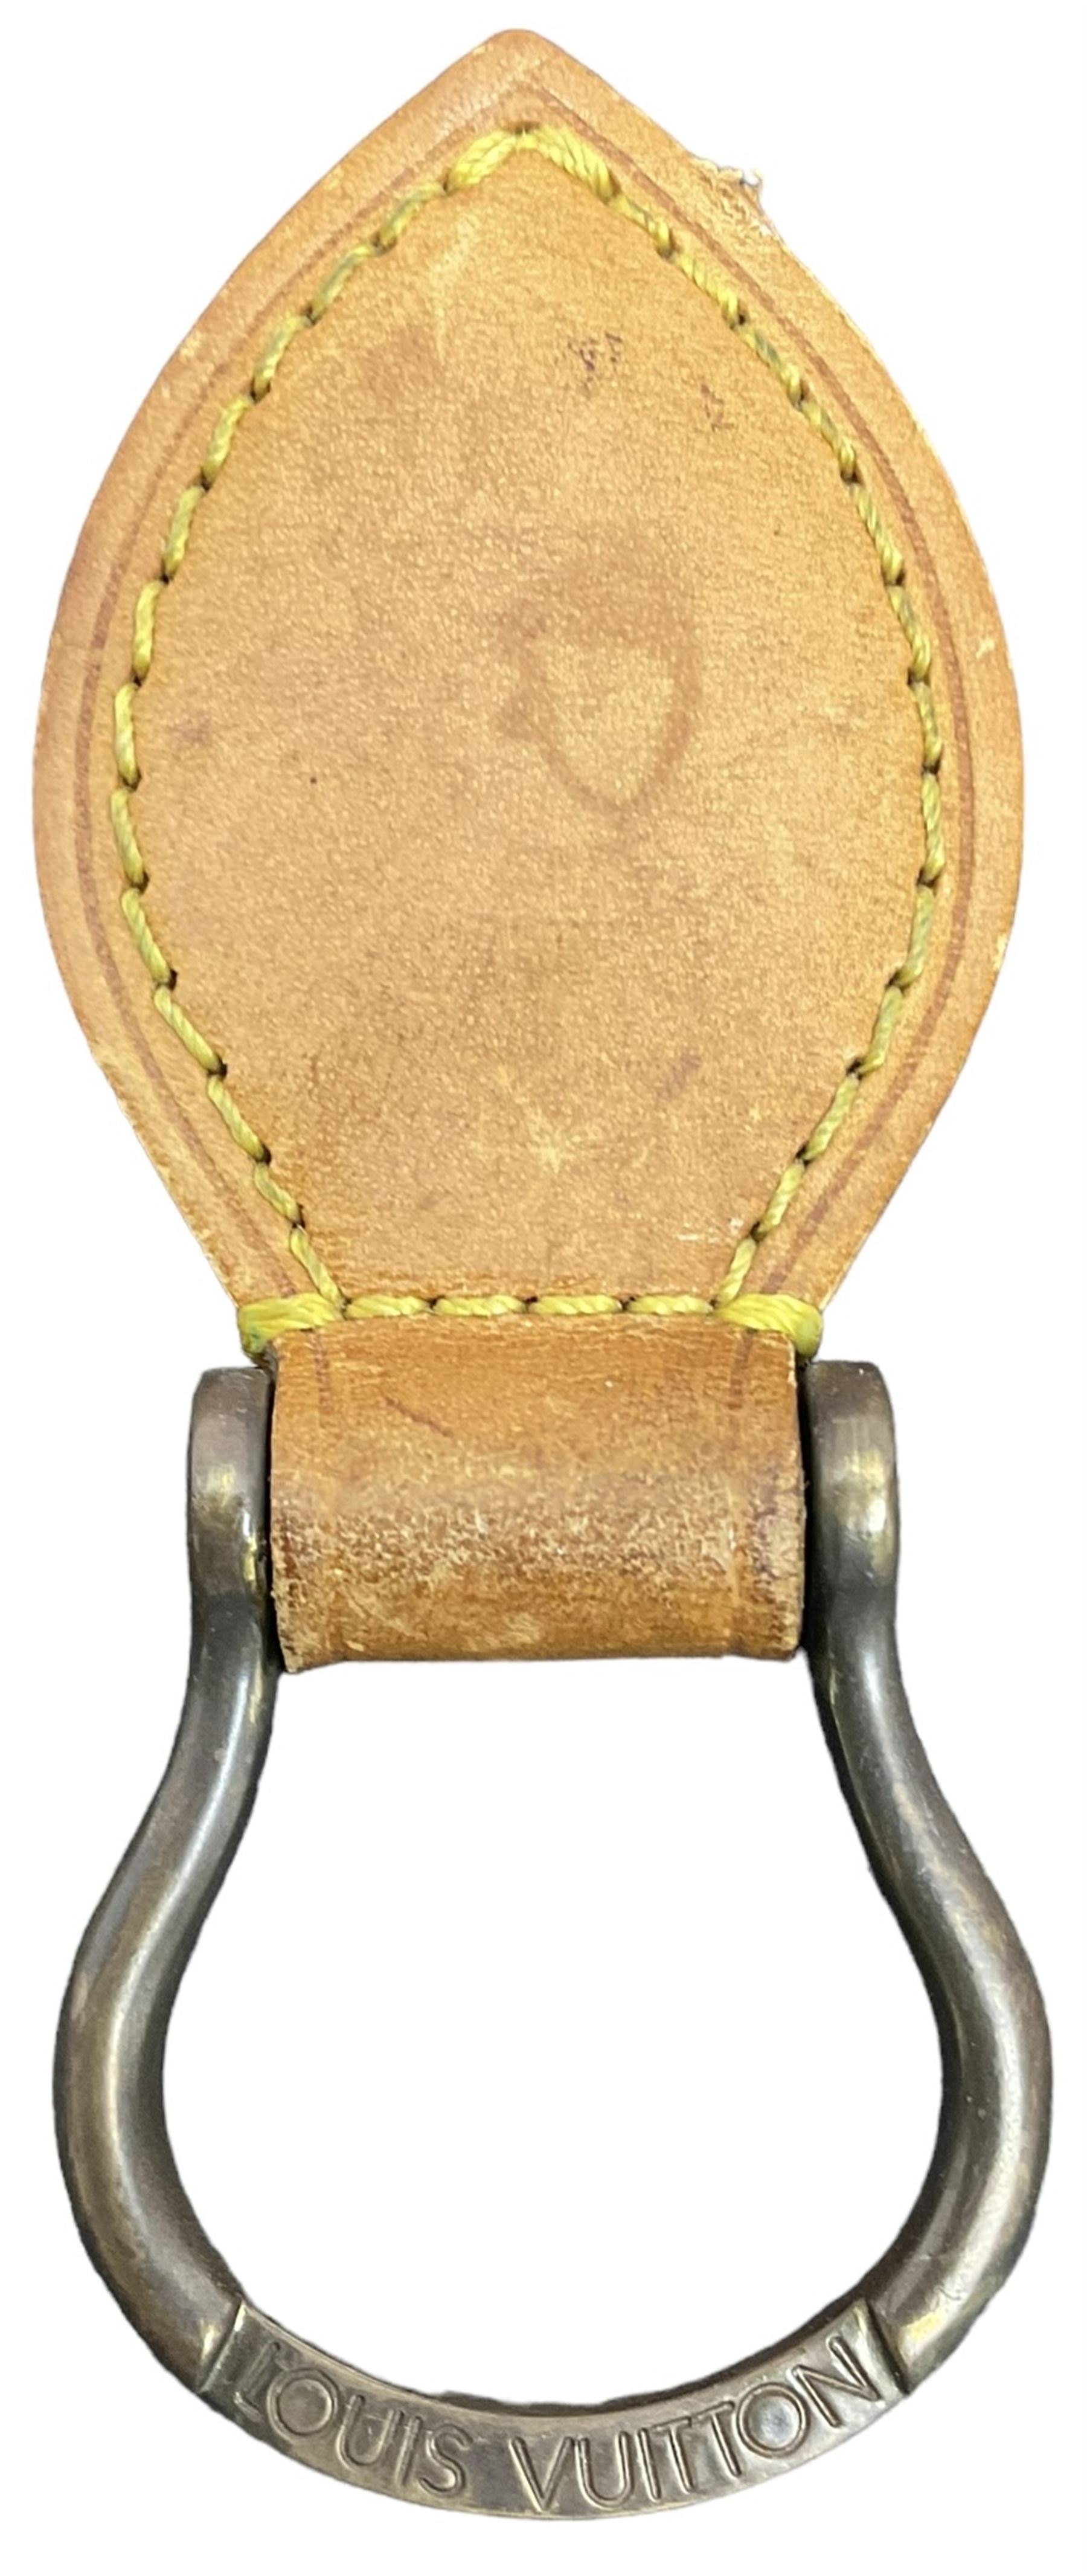 Louis Vuitton Saint Cloud cross body monogram bag with vachetta leather strap and snap closure to th - Image 7 of 11